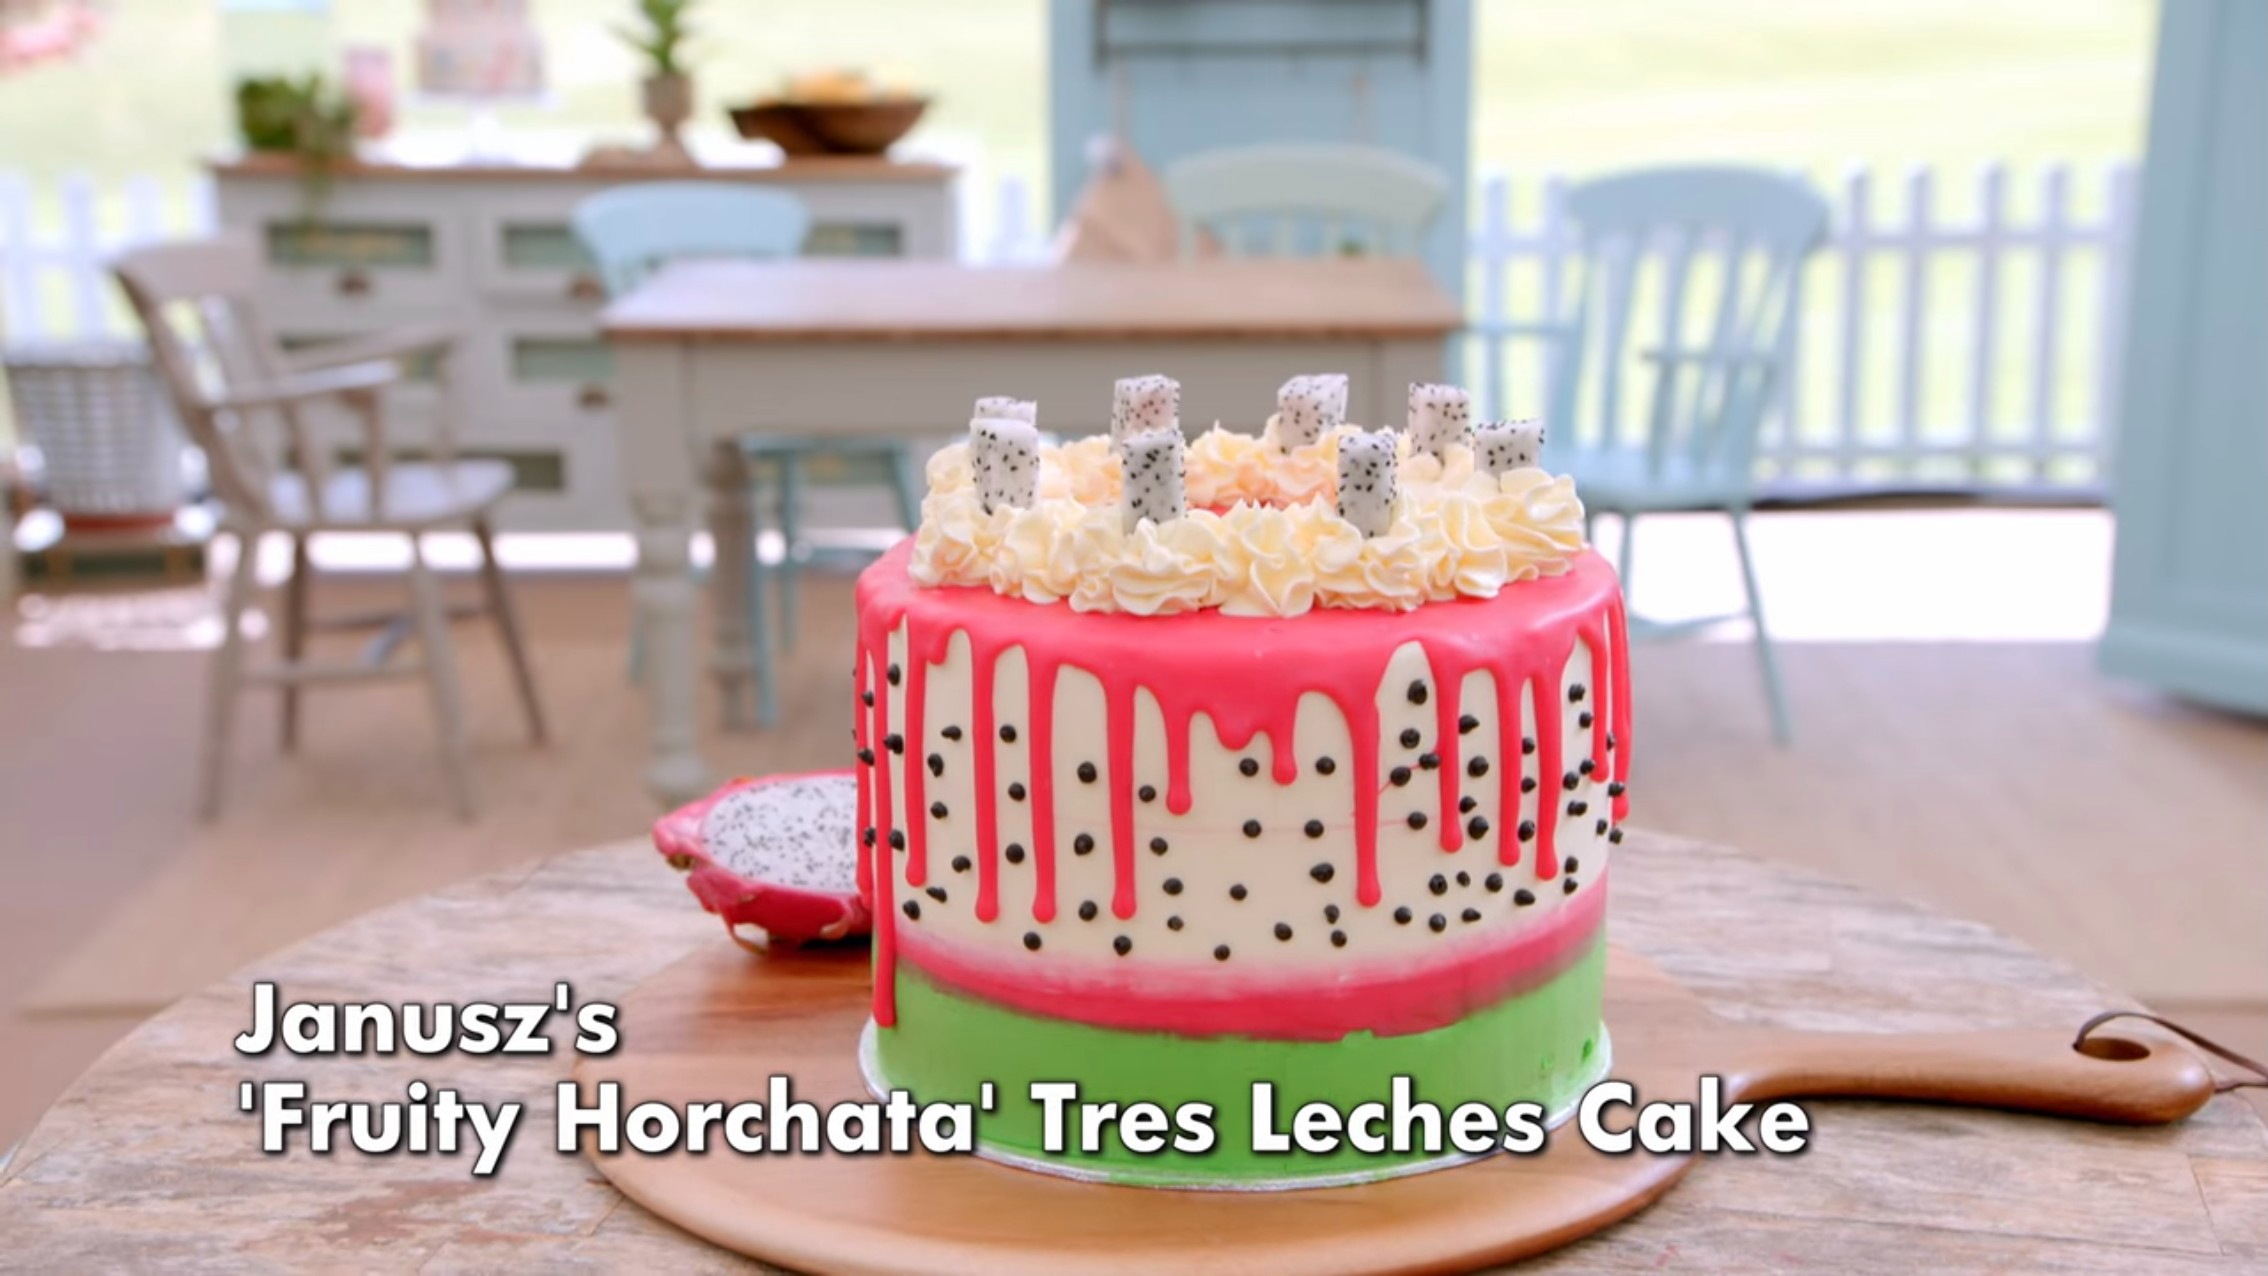 Picture Shows: The Great British Baking Show Collection 10 Mexican Week's Janusz's ‘Fruity Horchata’ Tres Leches Cake Showstopper